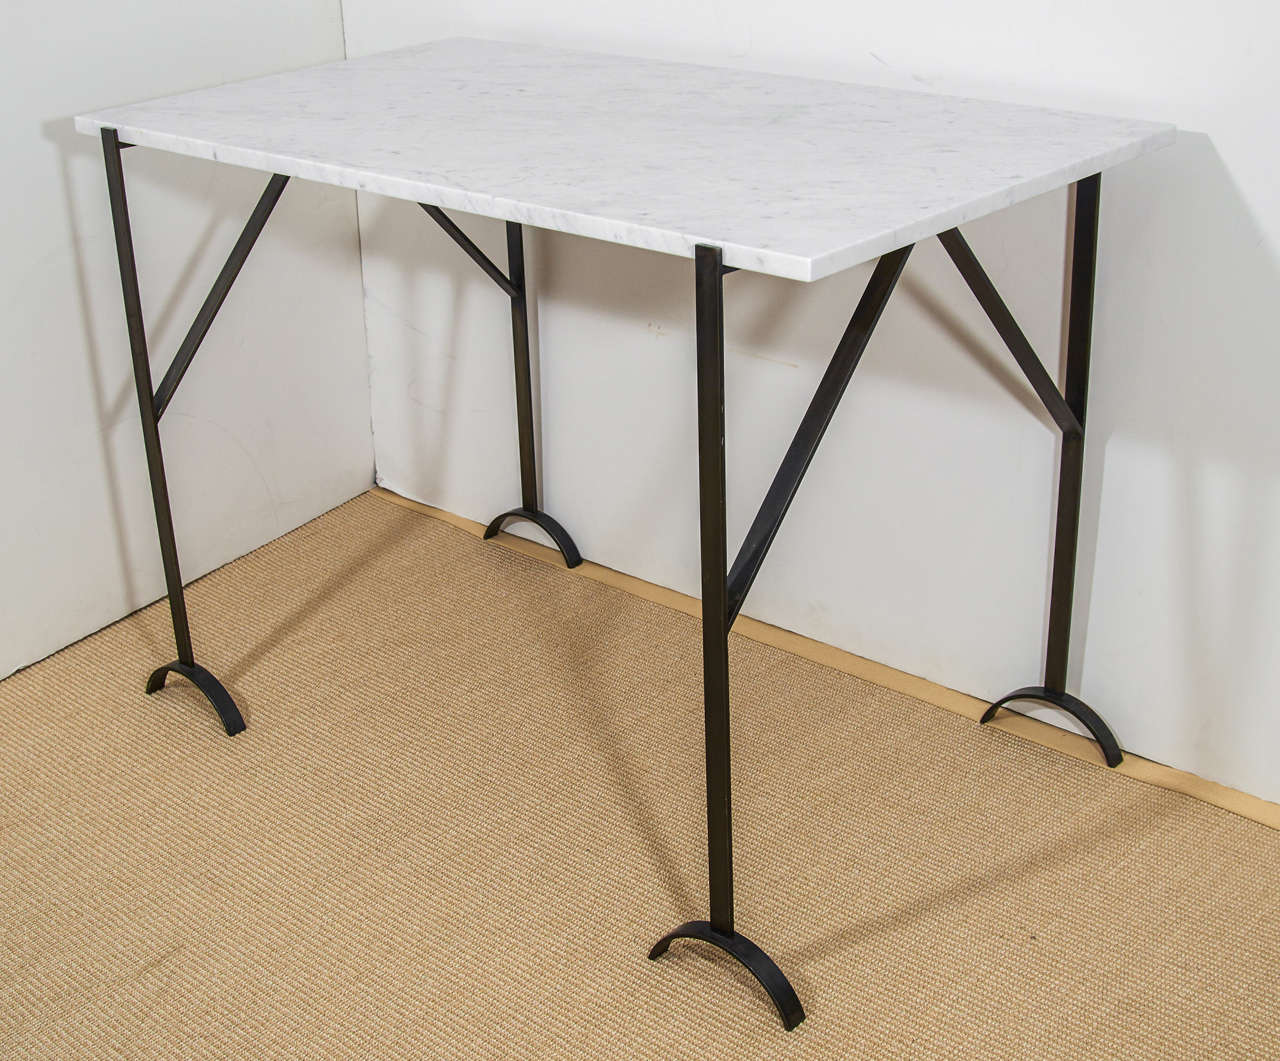 A vintage marble top table with black steel trestle legs and crescent feet